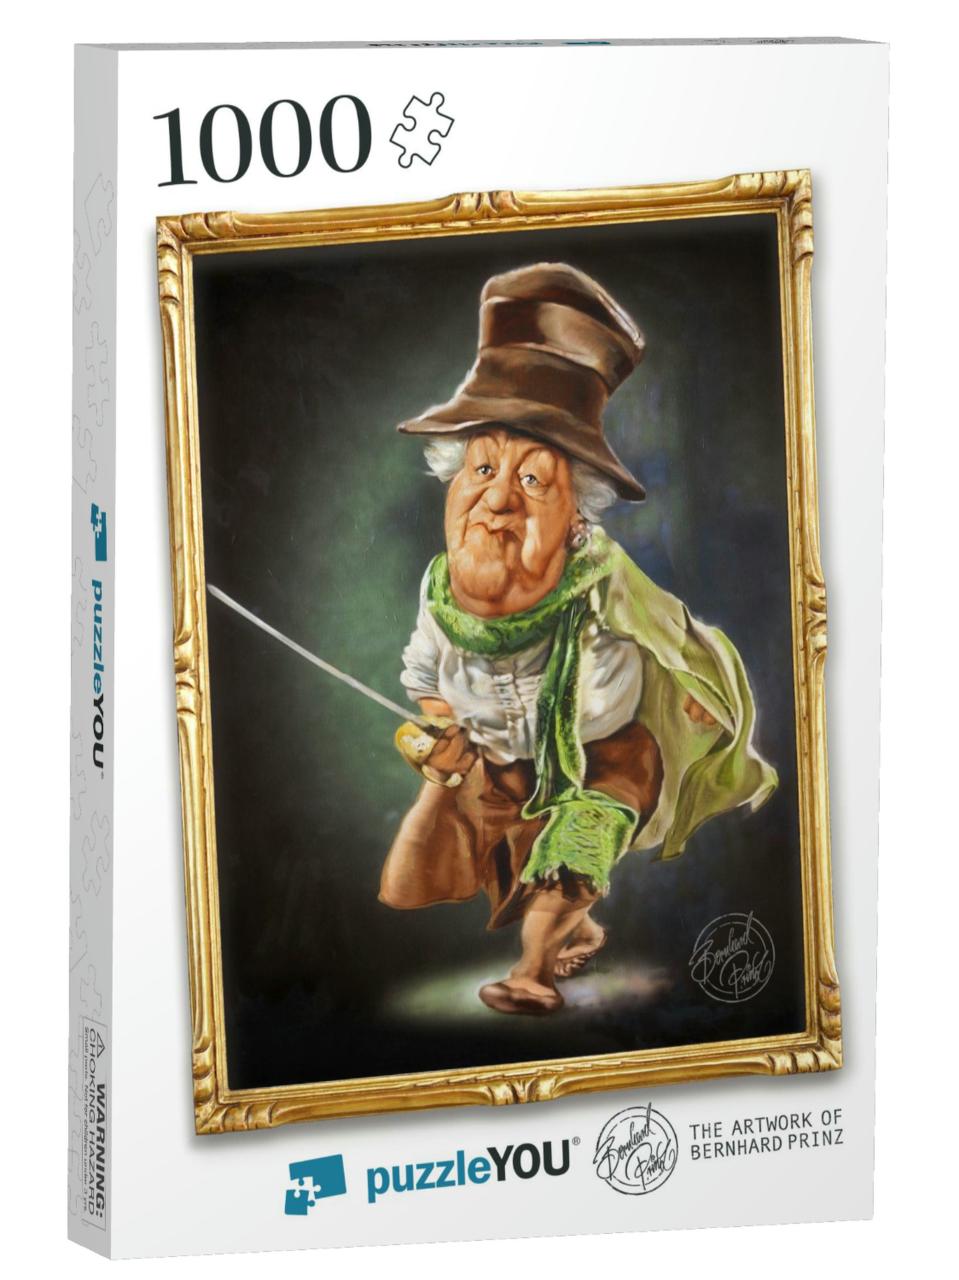 Miss Margaret Rutherford Portrait Jigsaw Puzzle with 1000 pieces